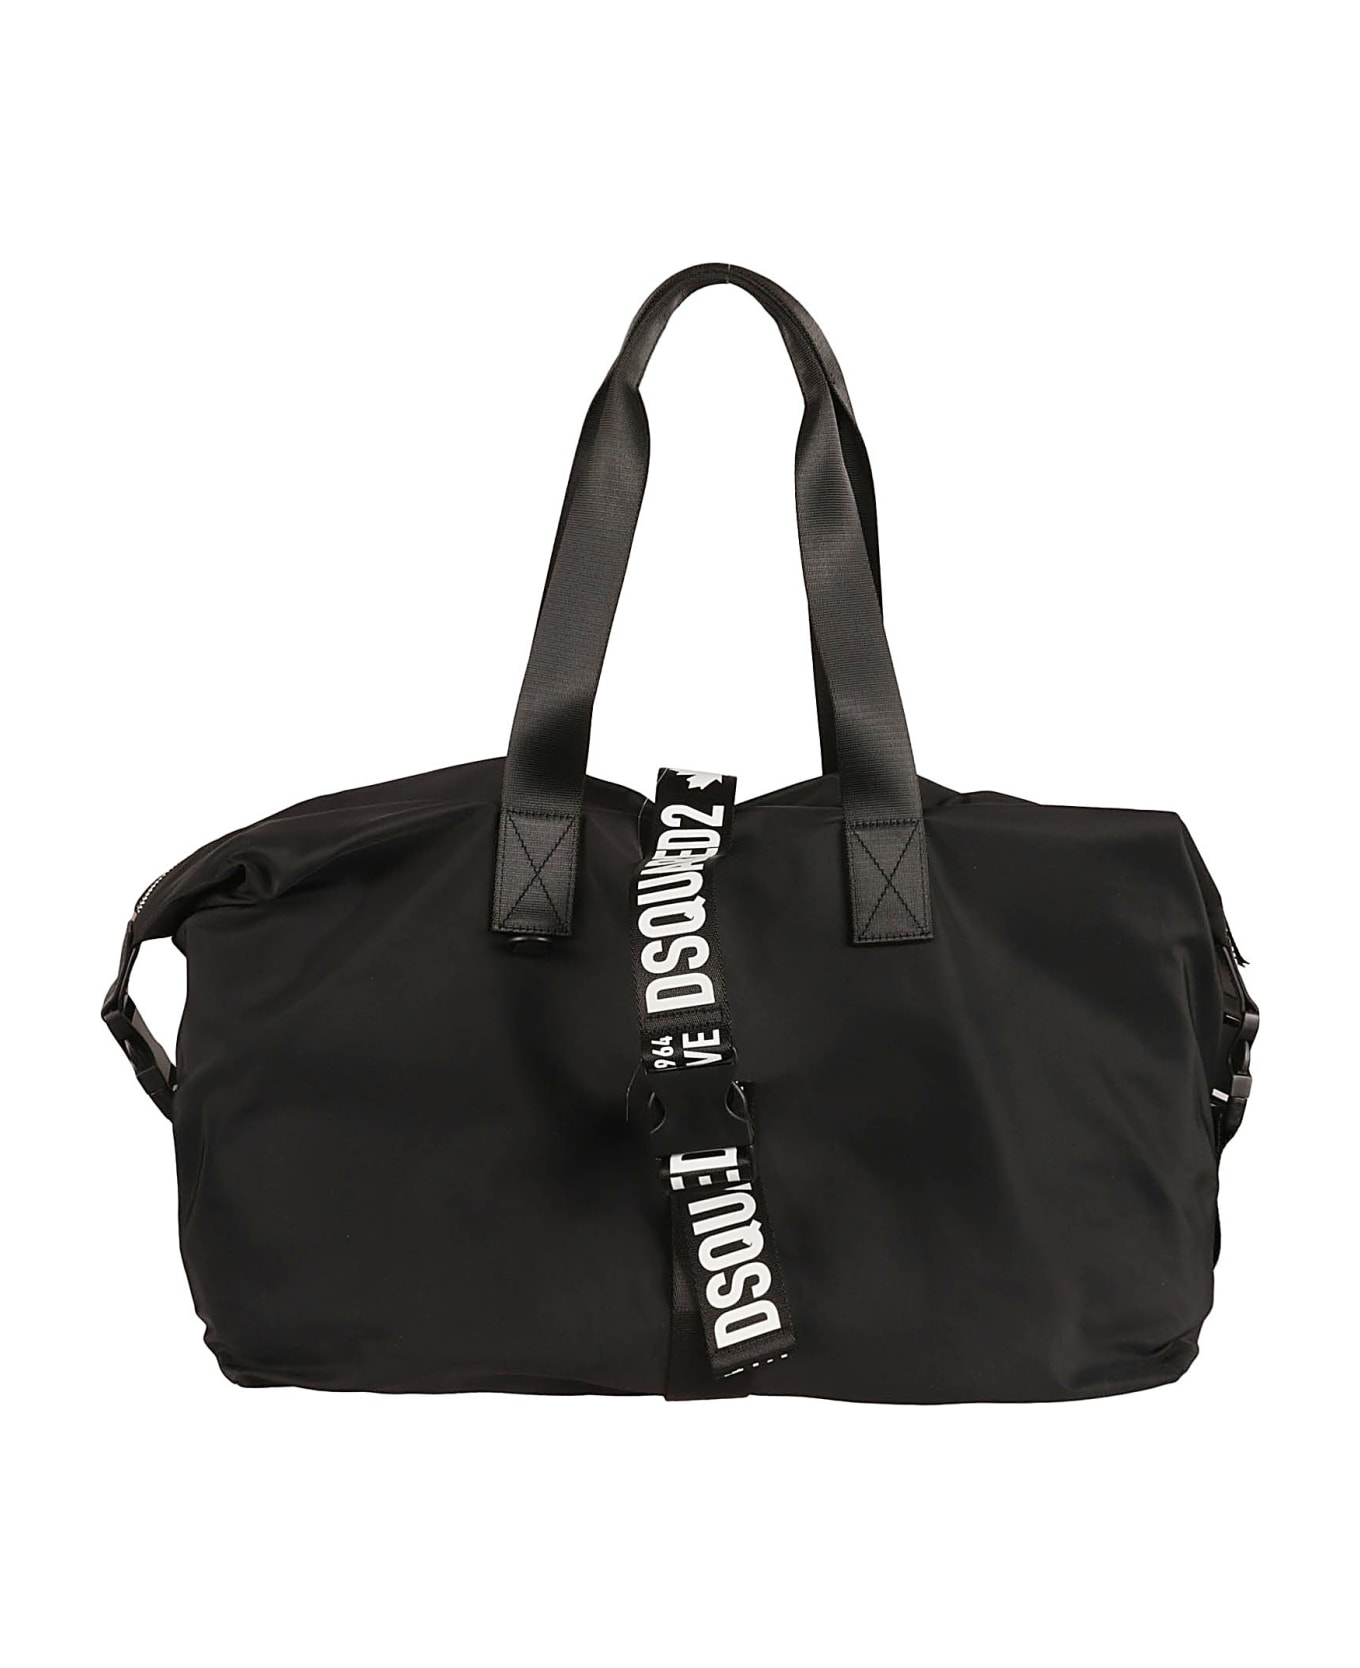 Dsquared2 Made With Love Duffle Bag トラベルバッグ